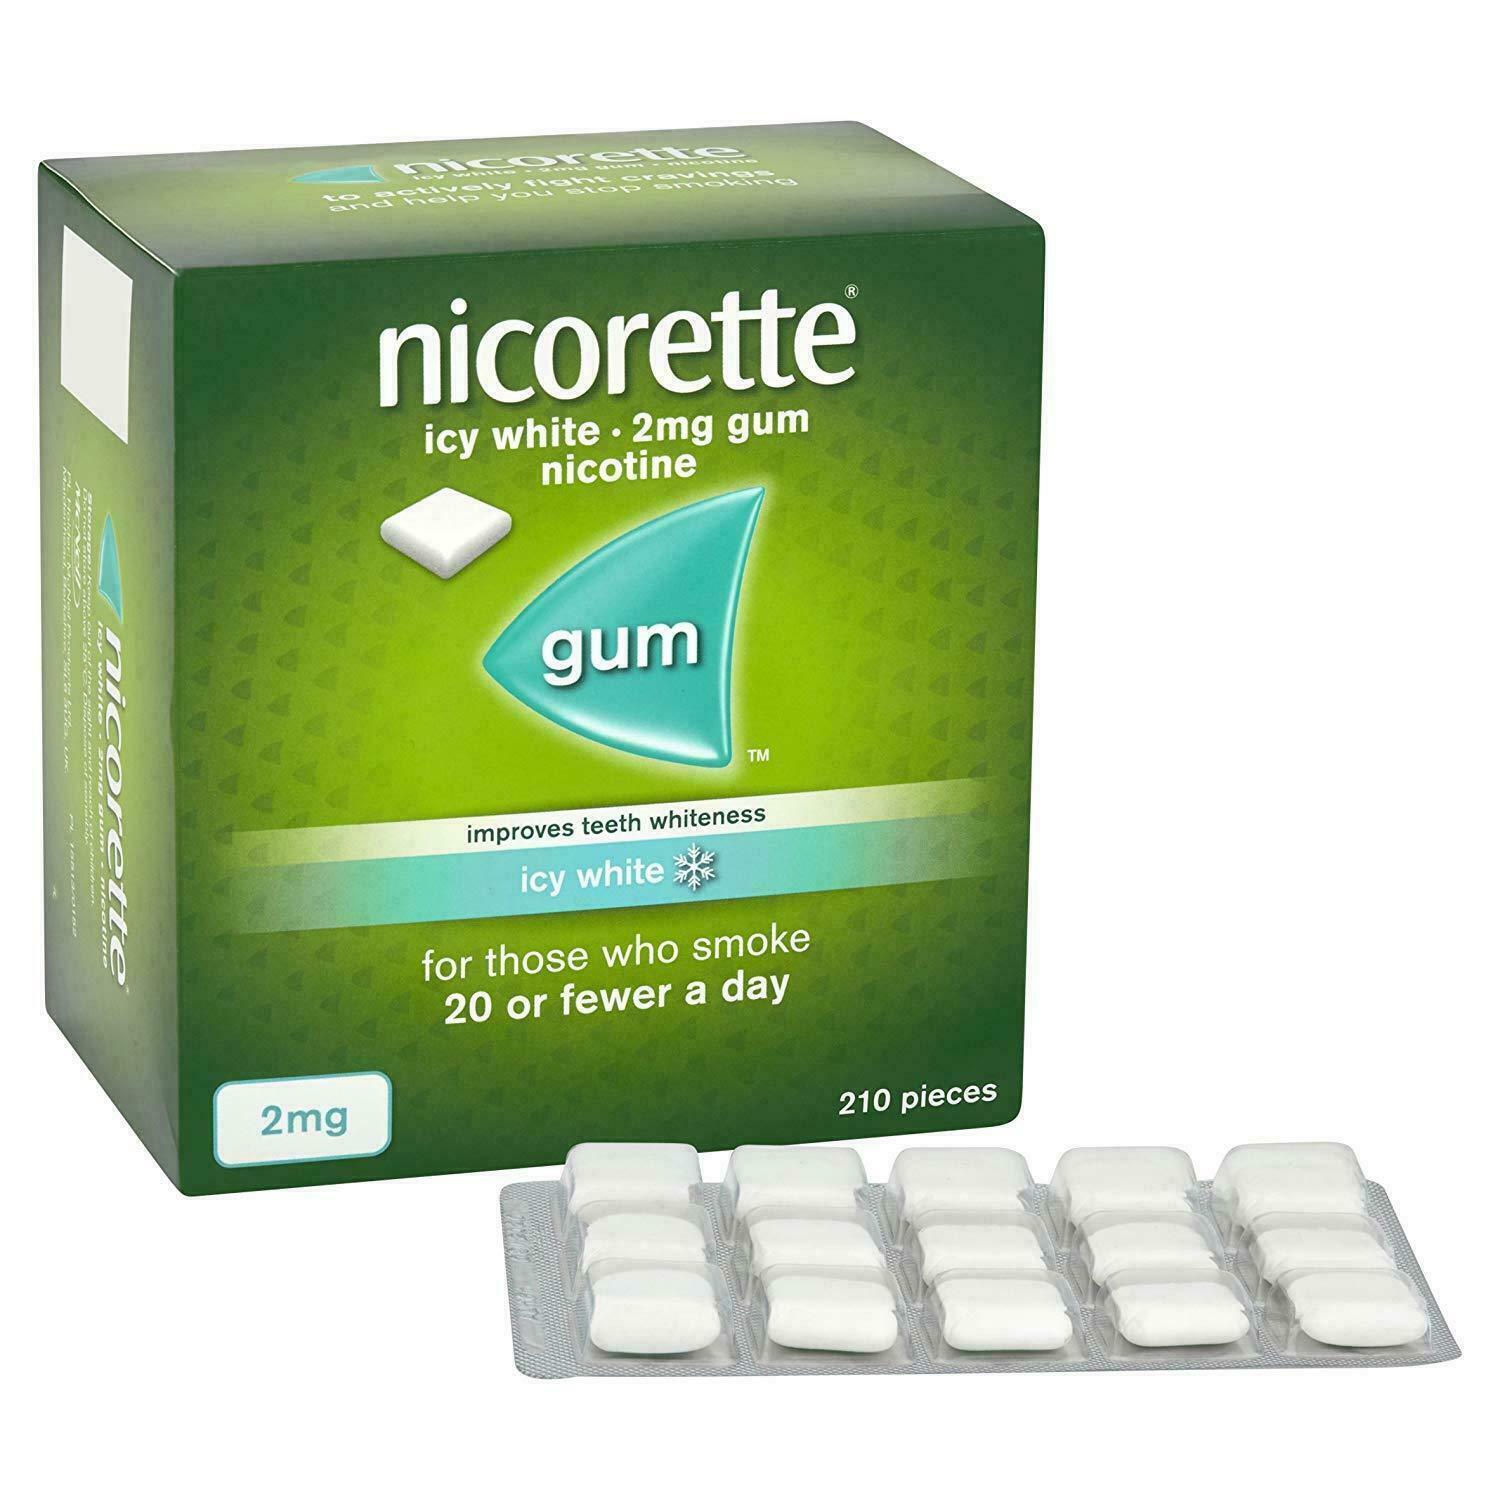 Nicorette Icy White Gum 2mg 210 Pieces-fast Ship From Usa Expire Date 2021